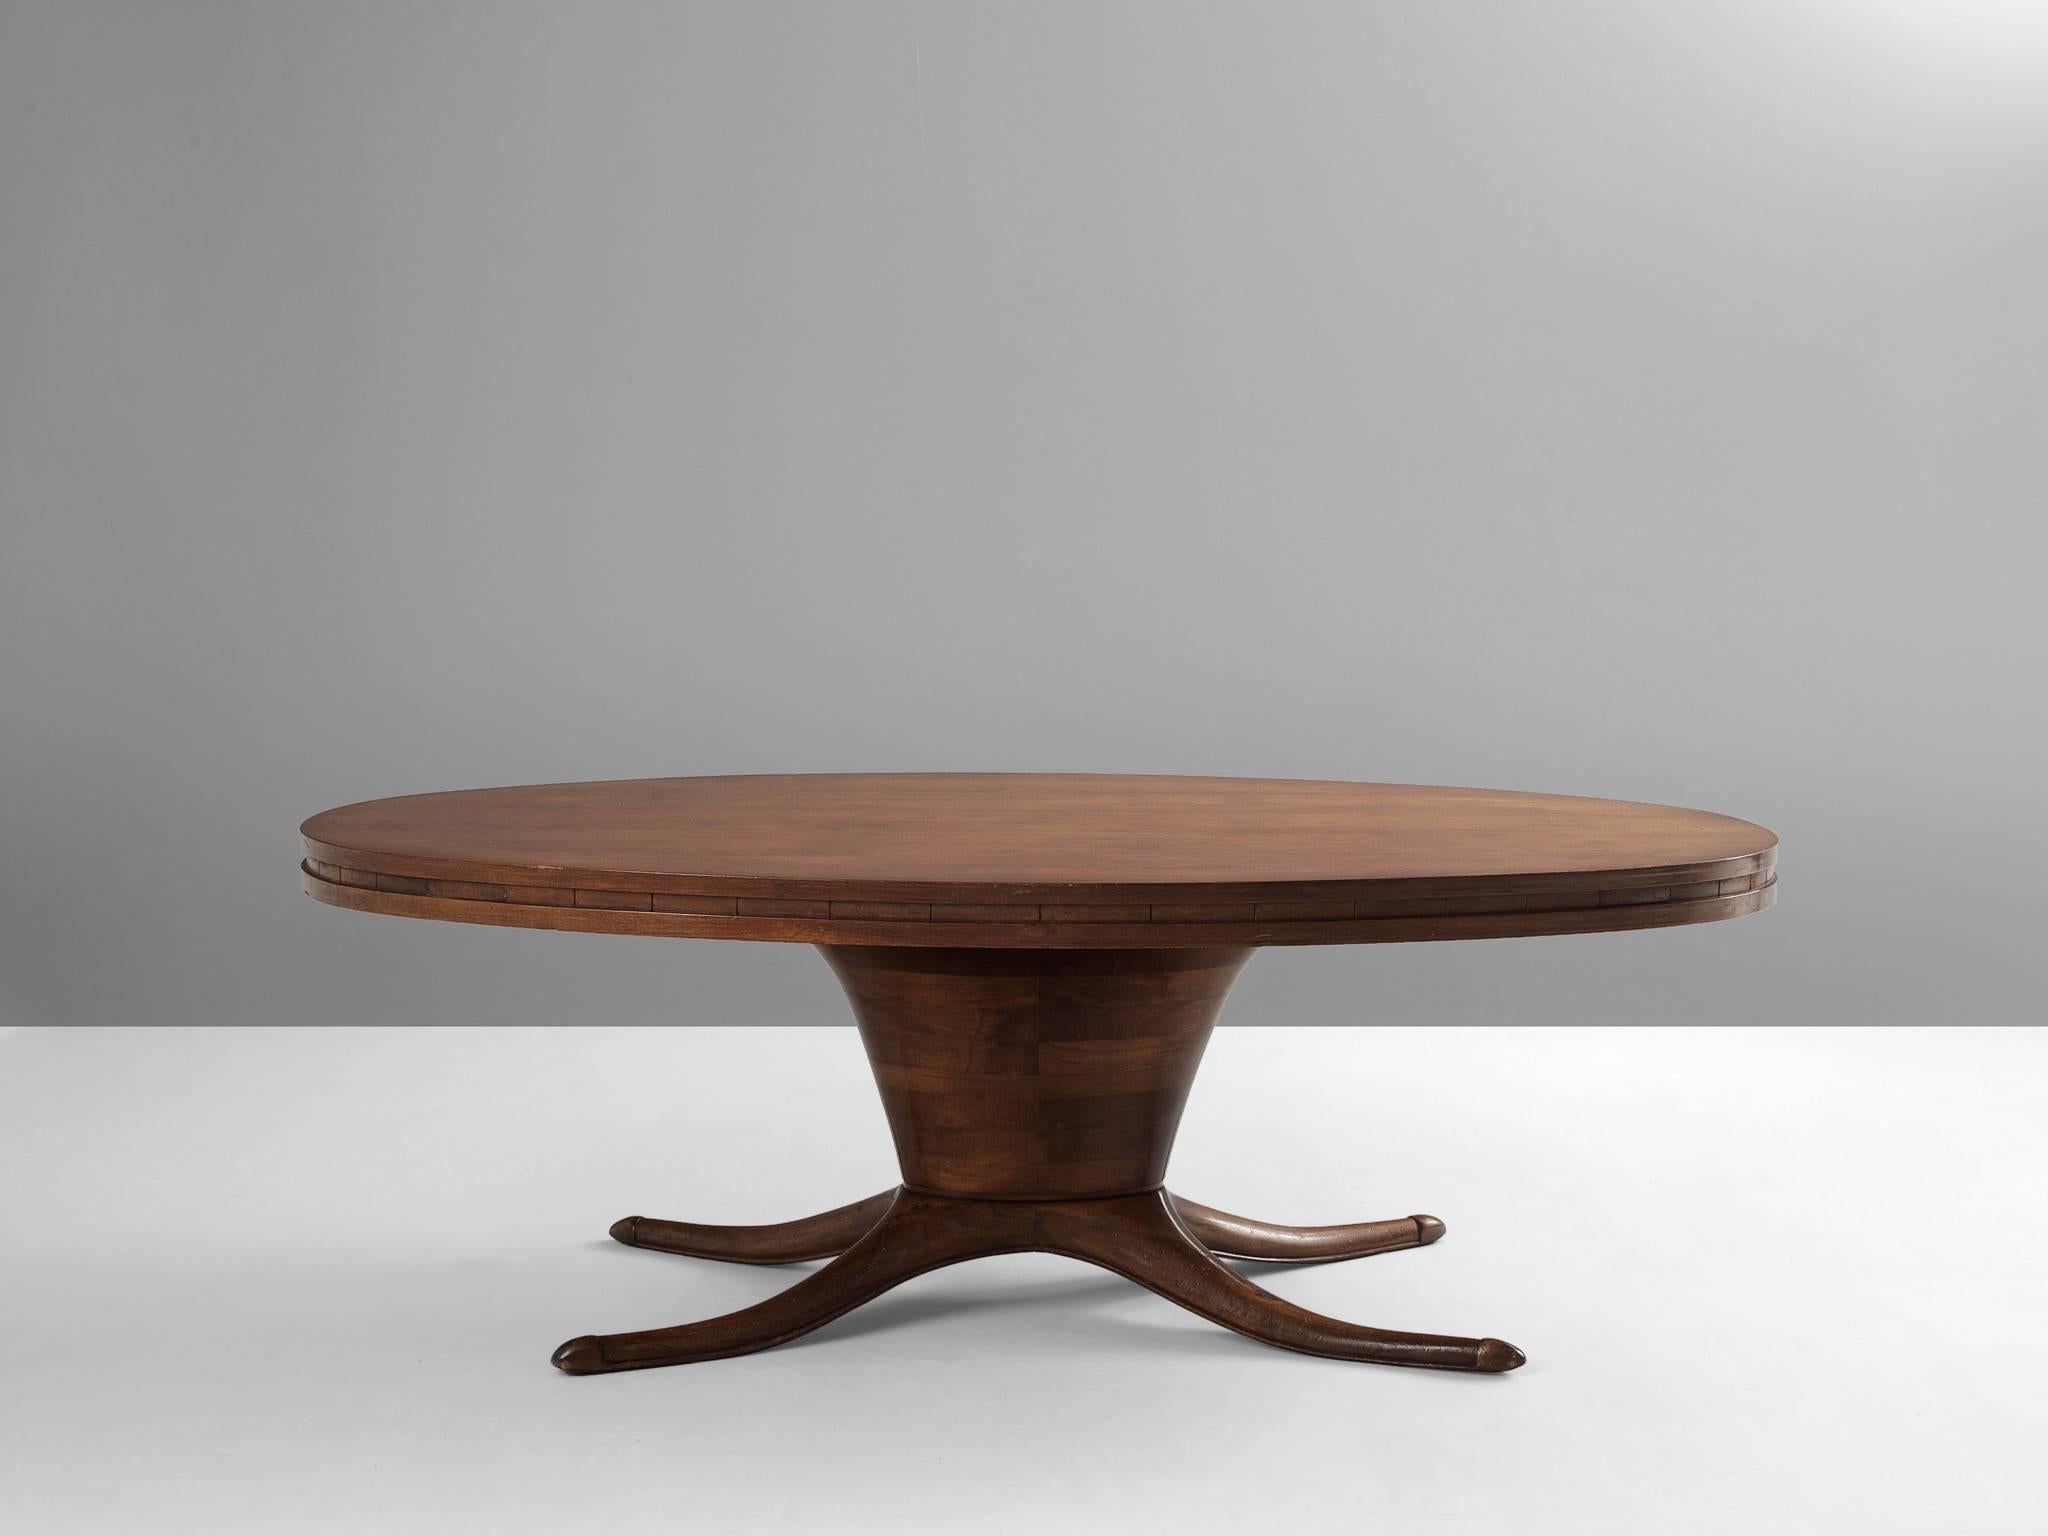 Dining table, in walnut, Italy 1950s.

Elegant oval dining table. The most striking detail of this table is the leg that is divided into four organic shaped feet. This is combined with the oval base and oval top. The shape of the four legs is